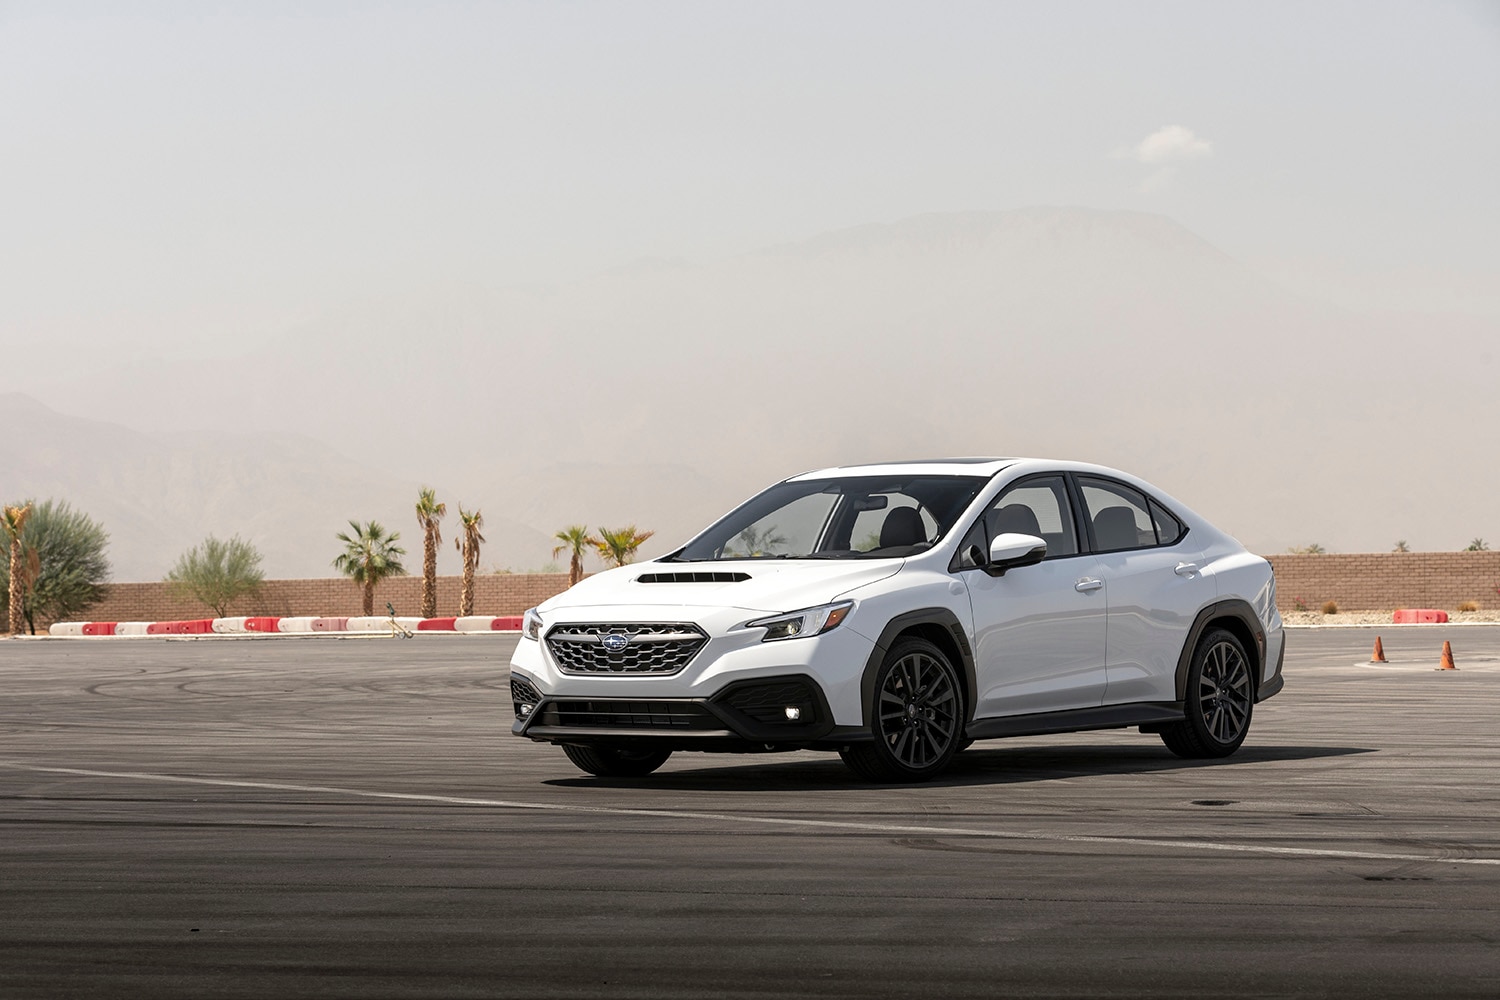 2023 Subaru WRX in white parked on a desert race track